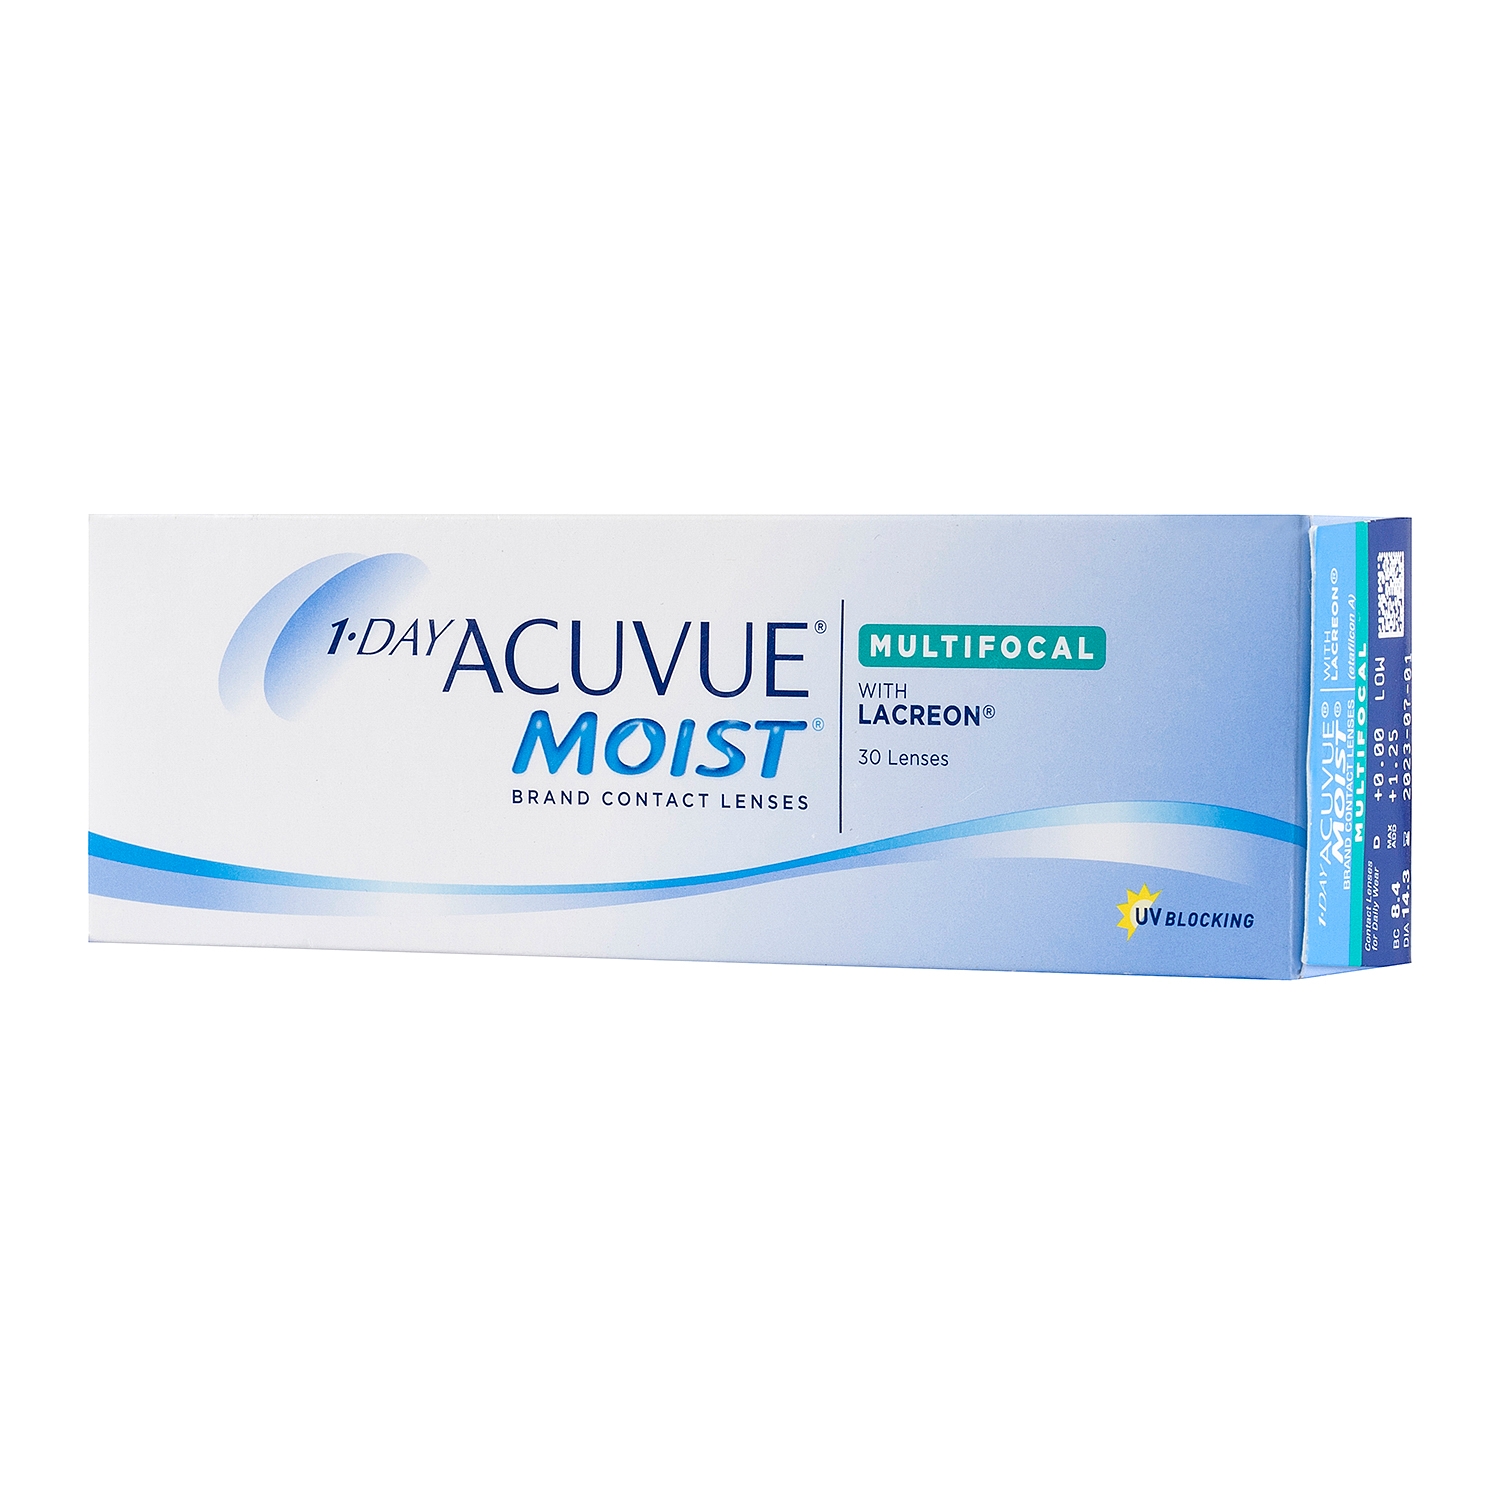 ?? 1 Day Acuvue Moist 30 Multifocal